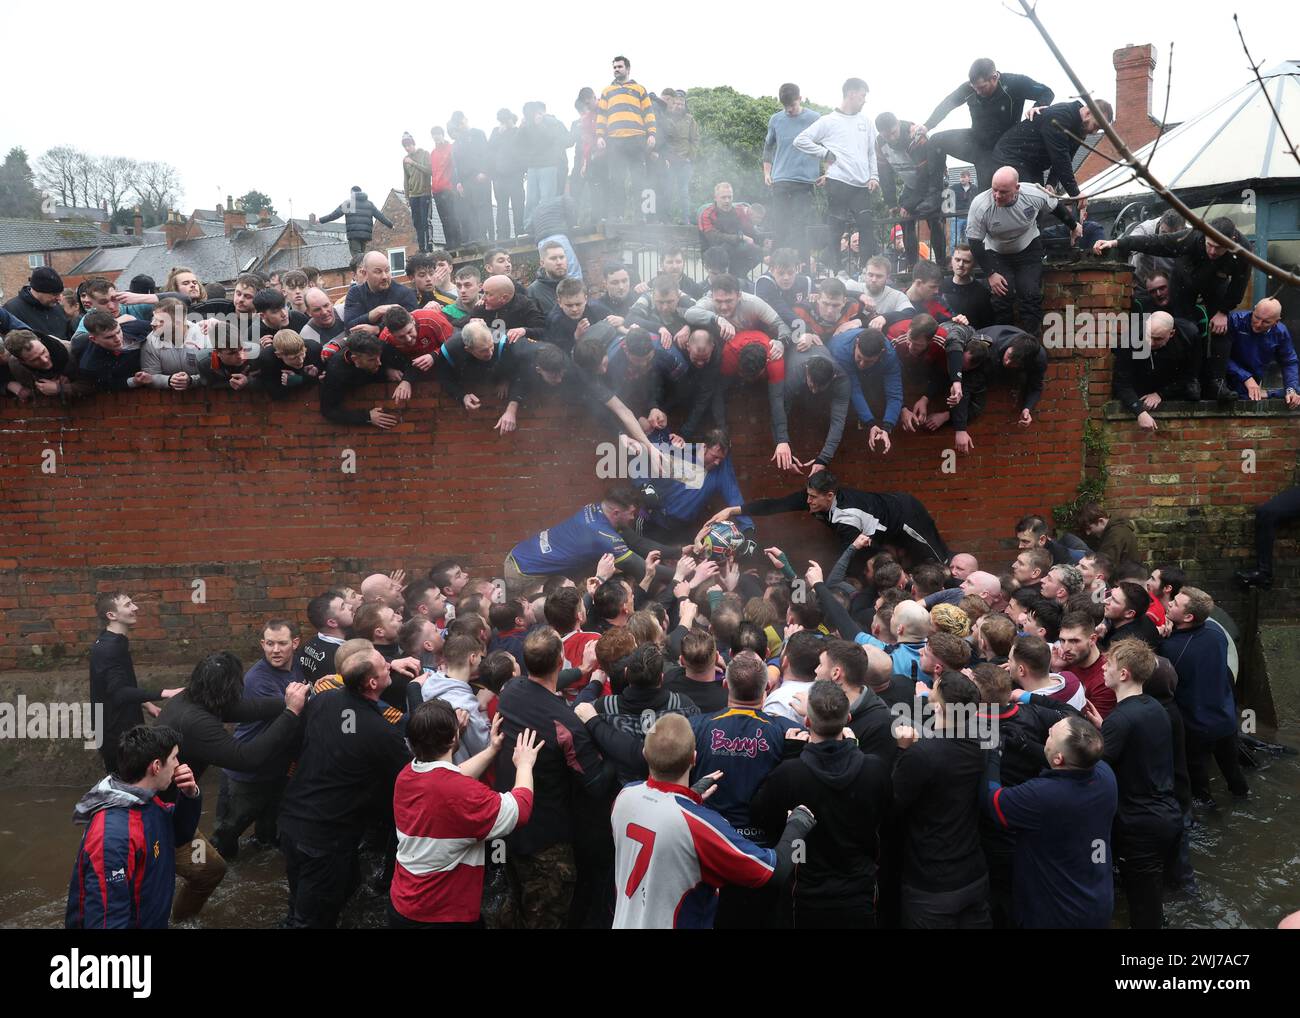 The Royal Shrovetide Football match has been played between the villagers of Ashbourne in Derbyshire since 1667. One side is known as the Upards and the other side as the Downards. Each team attempts to carry the ball back to their own goal to score. Picture credit should read: Cameron Smith/Sportimage Credit: Sportimage Ltd/Alamy Live News Stock Photo